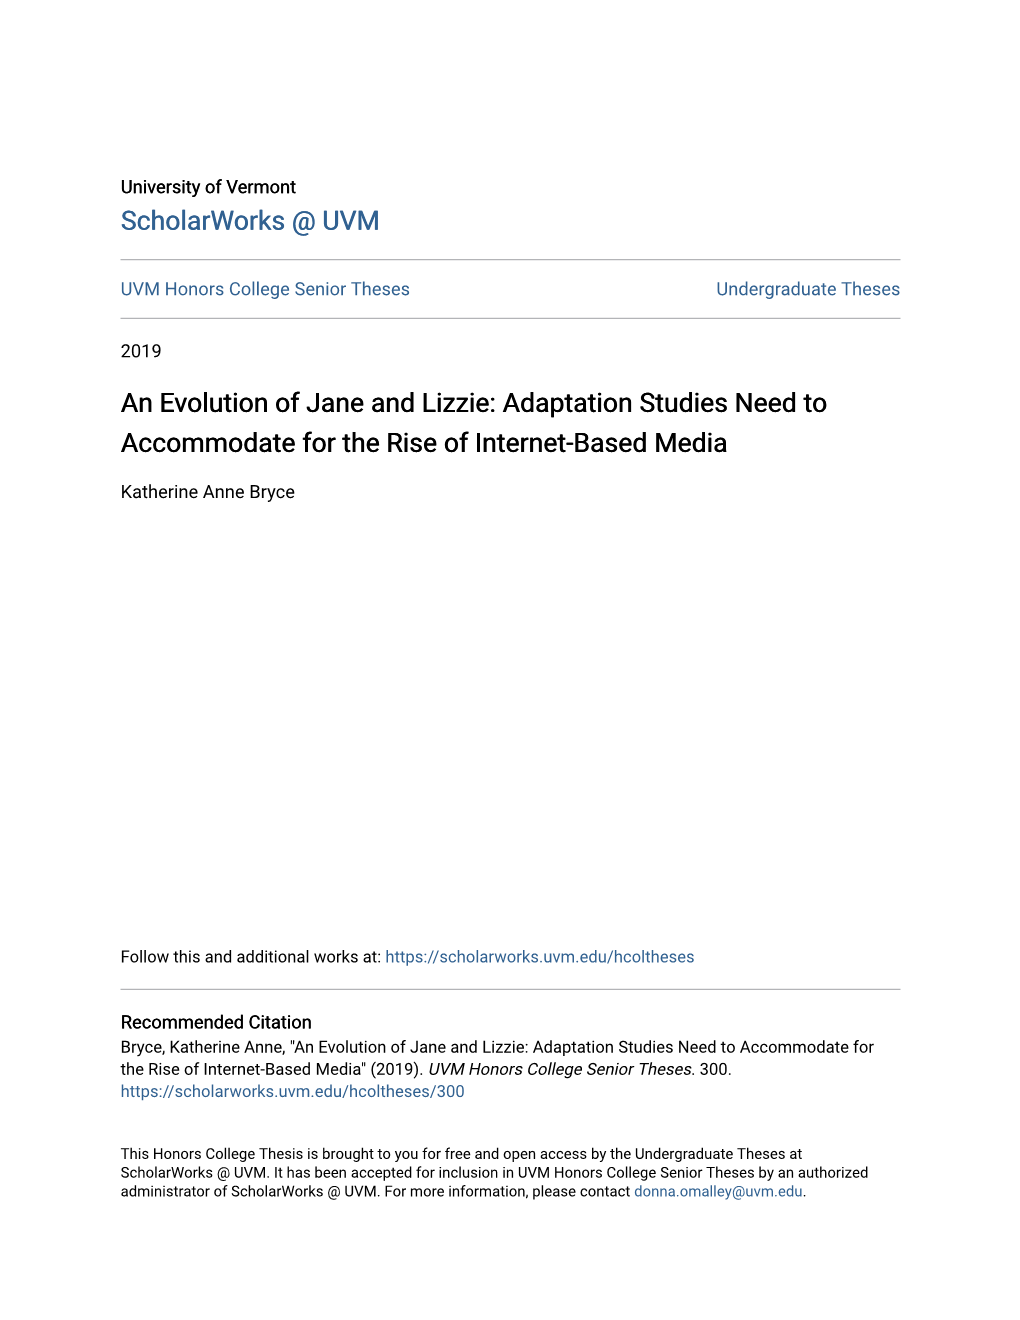 An Evolution of Jane and Lizzie: Adaptation Studies Need to Accommodate for the Rise of Internet-Based Media